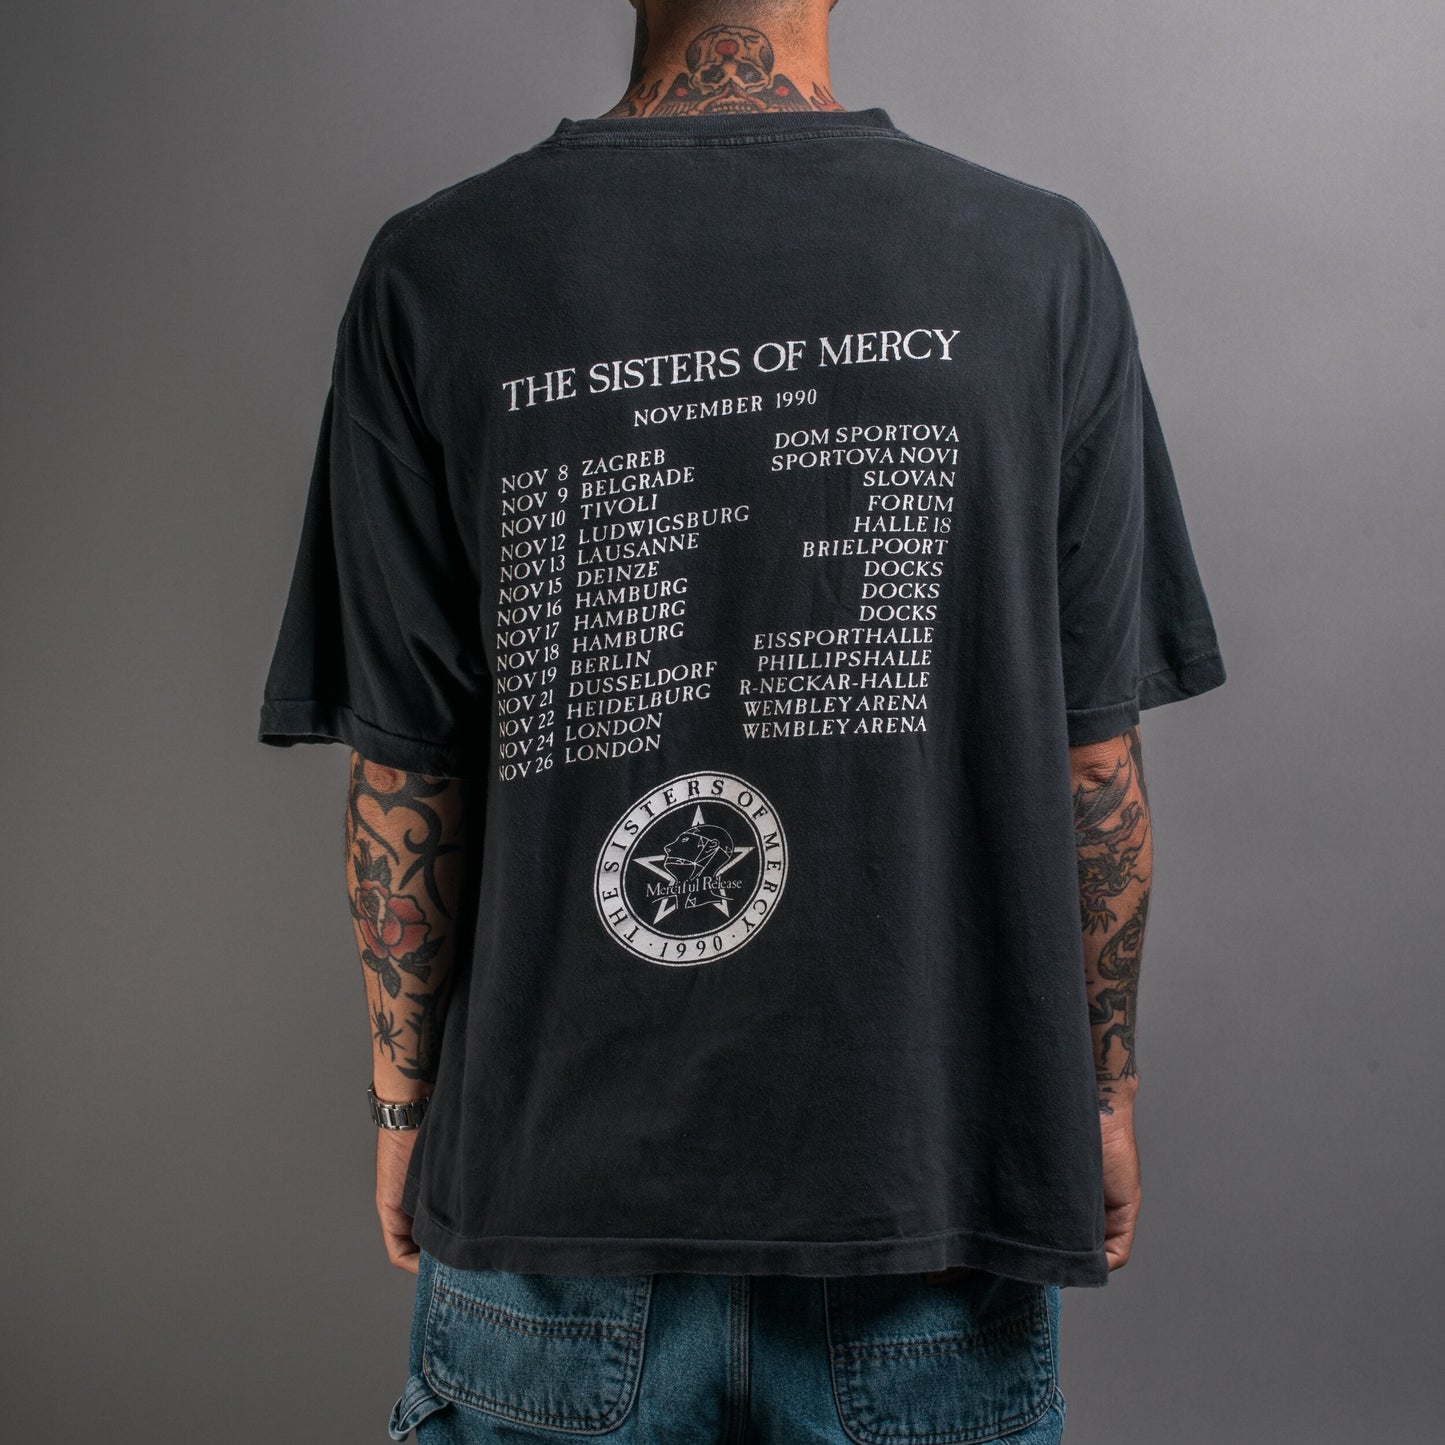 Vintage 1990 The Sisters Of Mercy Tour T-Shirt